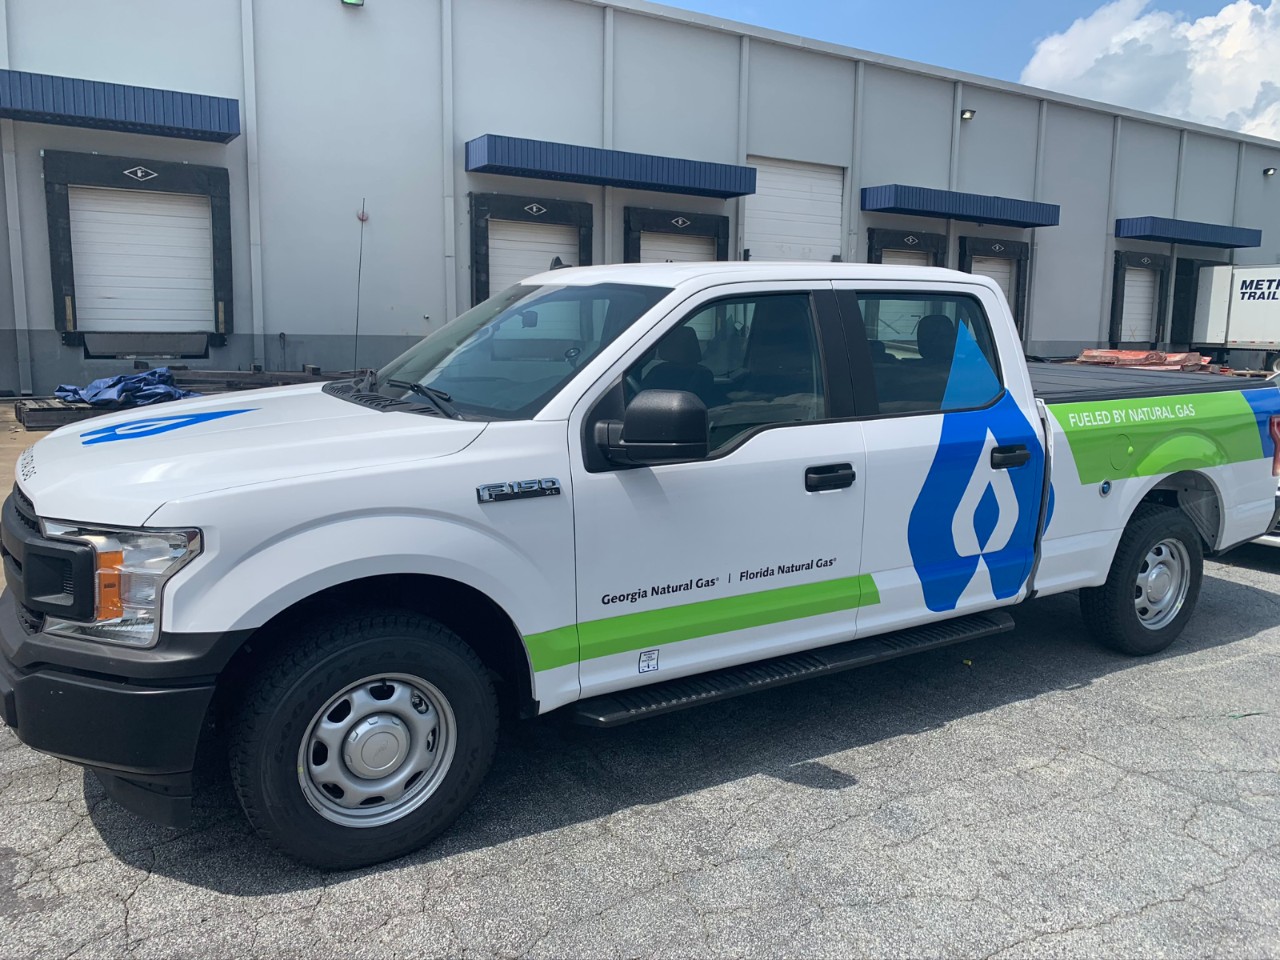 Florida Natural Gas branded pickup truck that is sustainably fueled by natural gas.